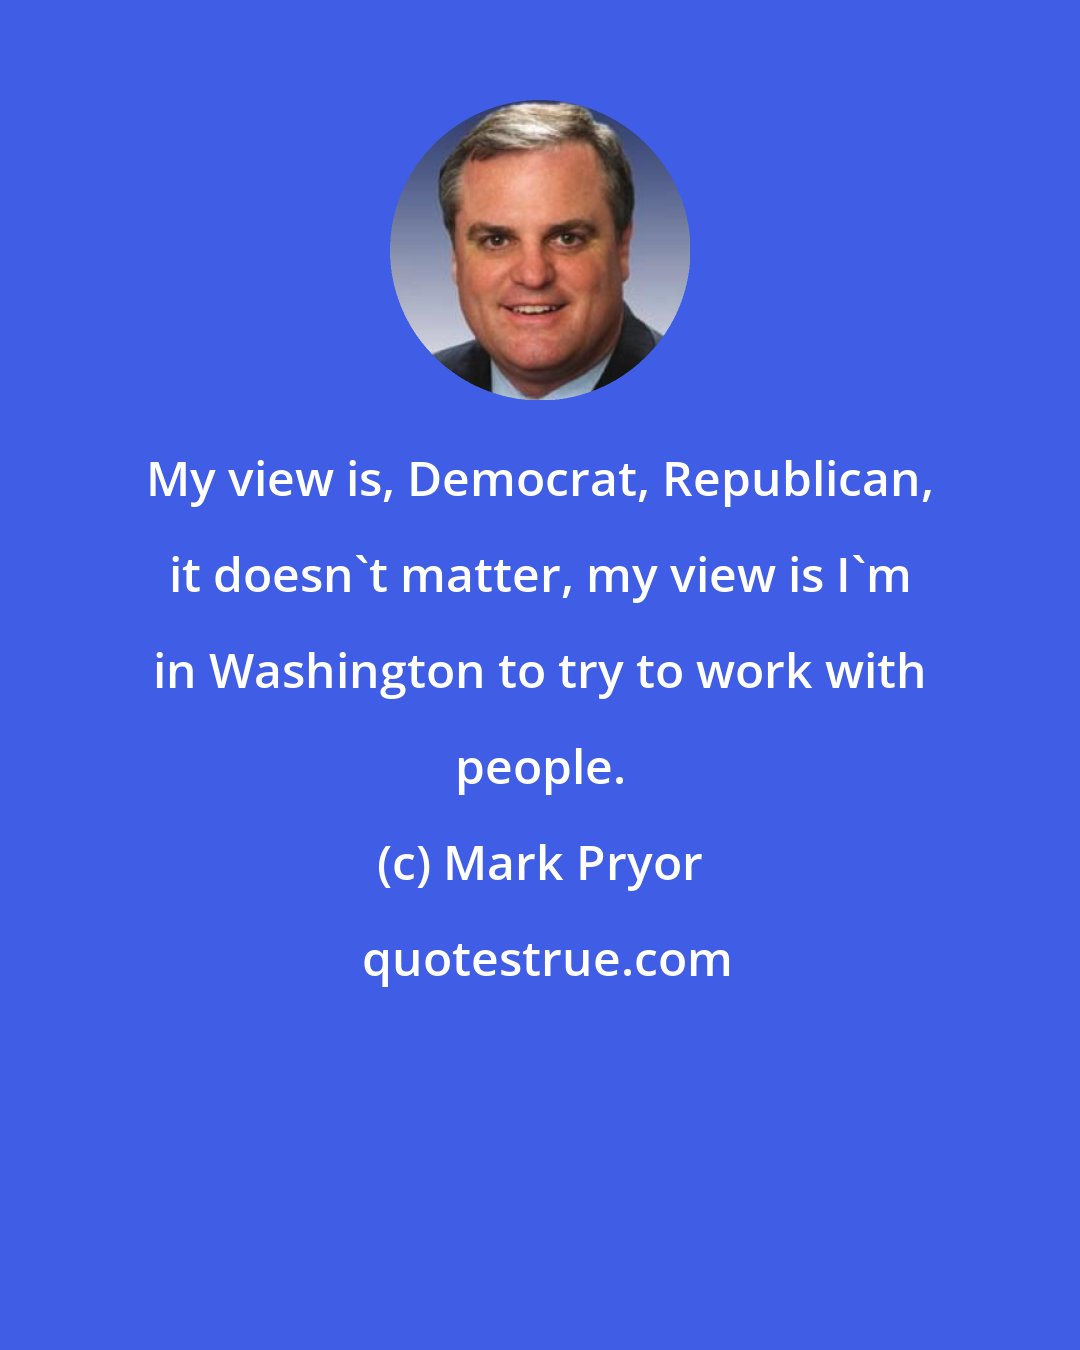 Mark Pryor: My view is, Democrat, Republican, it doesn't matter, my view is I'm in Washington to try to work with people.